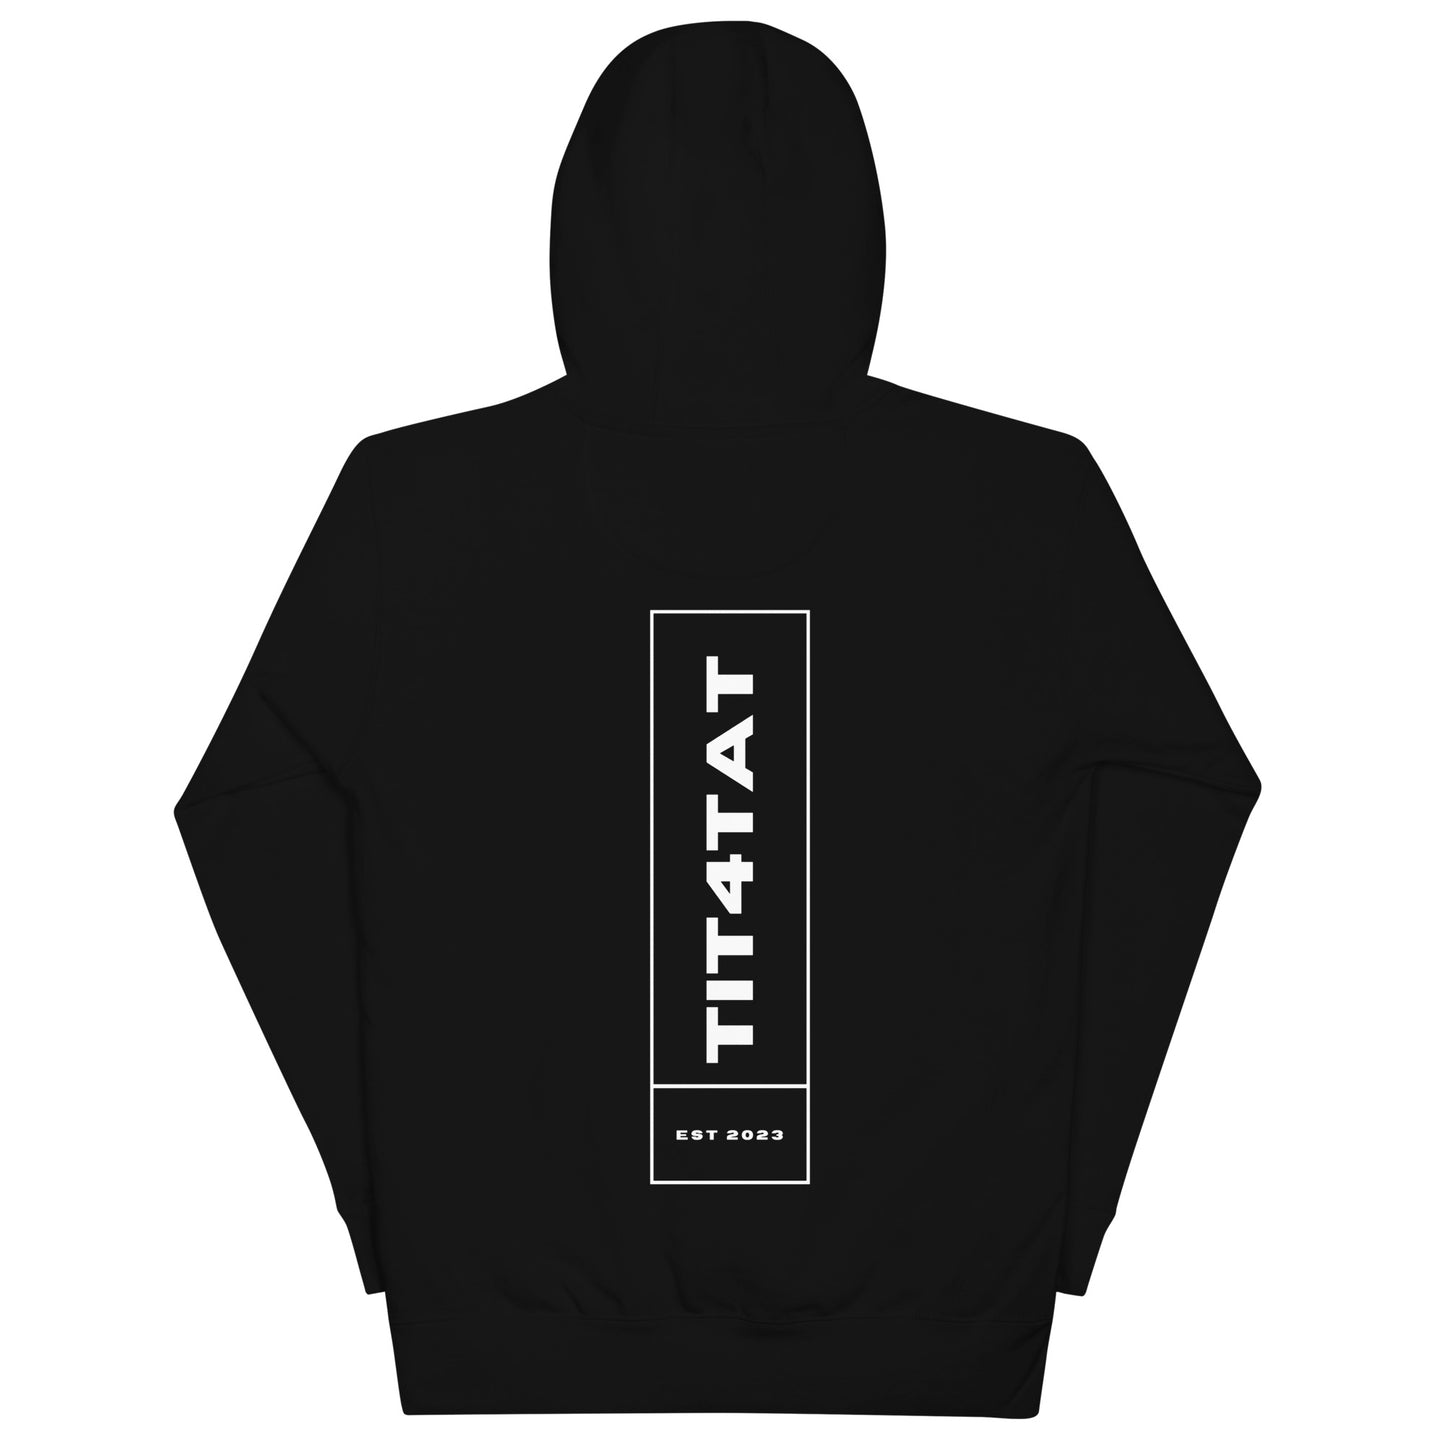 Tit4Tat - "Unstoppable Persuit" Hoodie